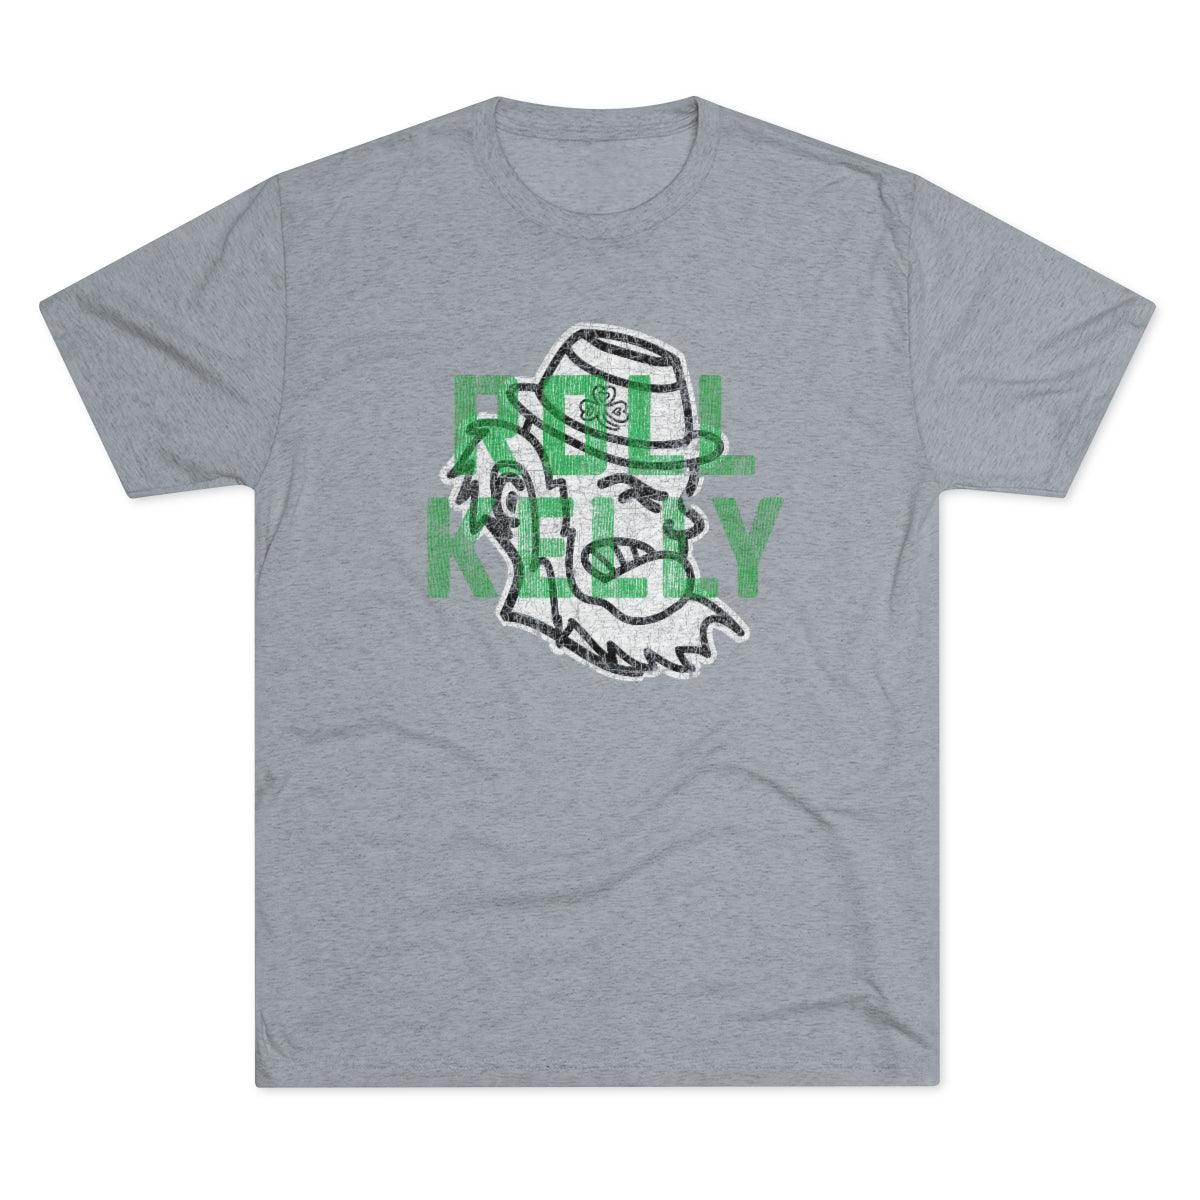 ROLL KELLY_MASCOT_overprint collection-Unisex Tri-Blend Crew Tee